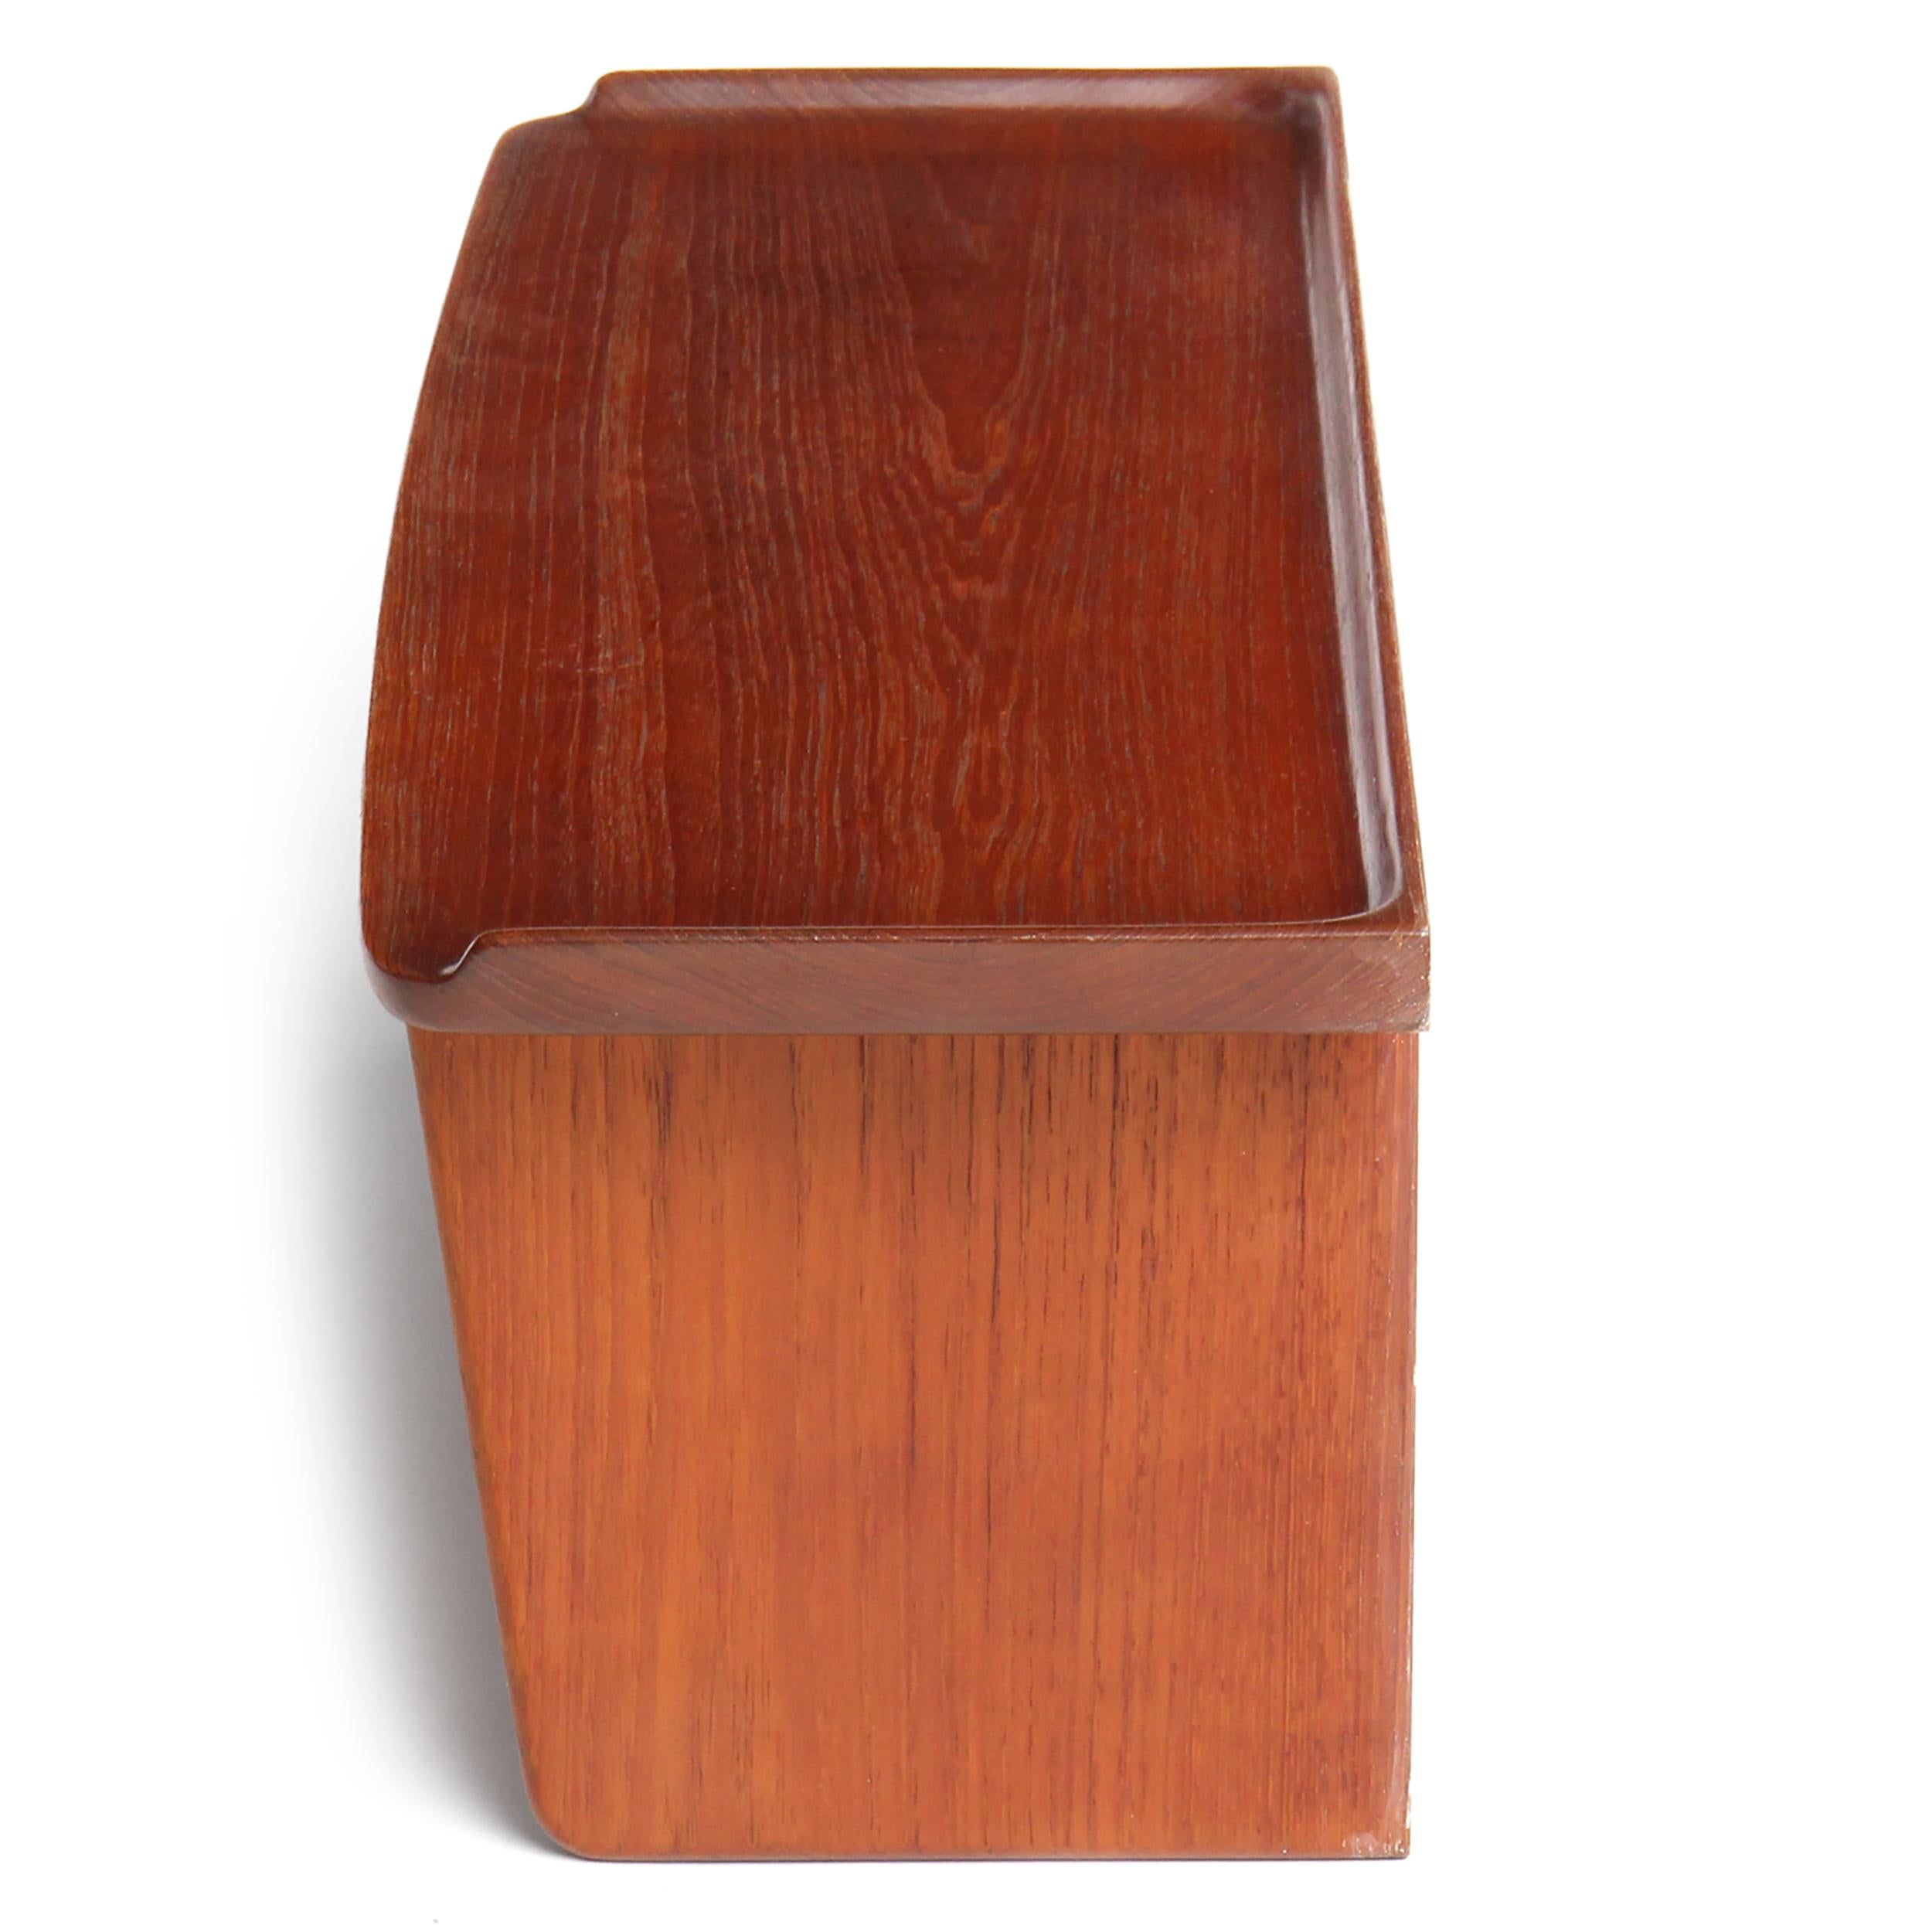 A solid teak wall-mount box with a gallery top and a flip-down storage bin.